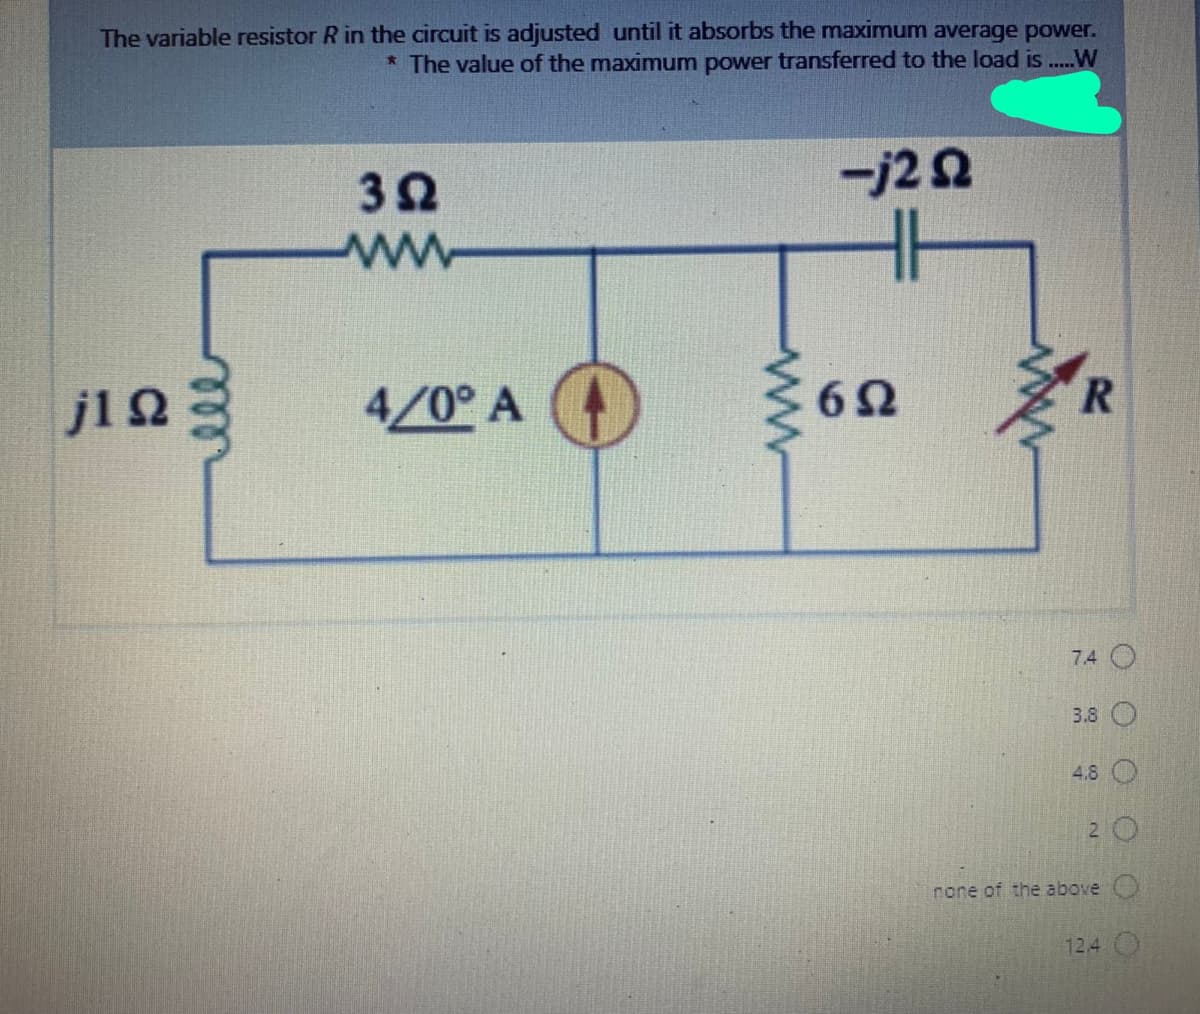 The variable resistor R in the circuit is adjusted until it absorbs the maximum average power.
* The value of the maximum power transferred to the load is ..W
ーj22
jl2
4/0° A
7.4 O
3.8 O
4.8 O
none of the above
12,4 O
